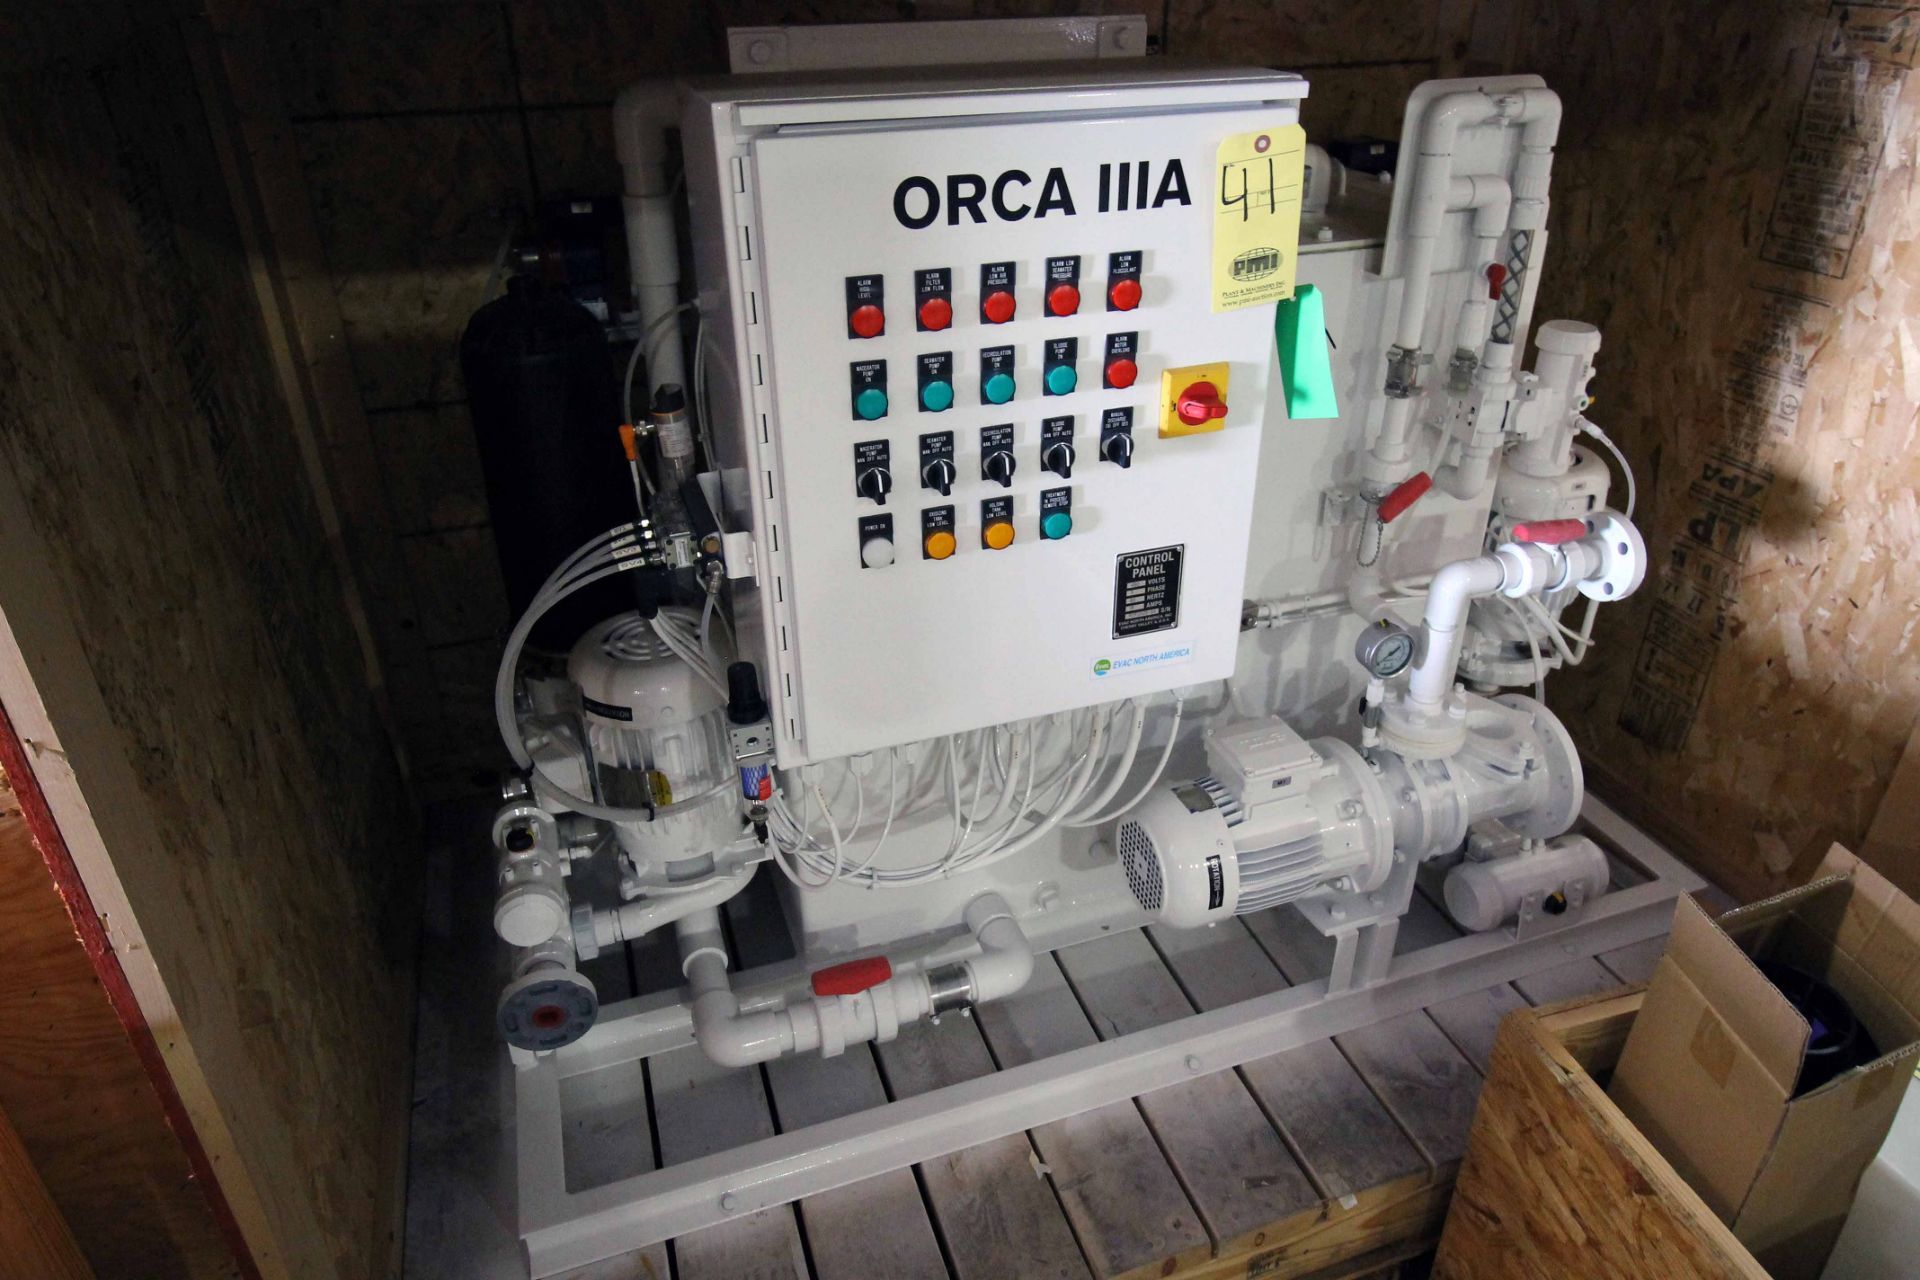 ONBOARD WASTEWATER TREATMENT PLANT, EVAC NORTH AMERICAN MDL. ORCA IIIA, unused, physiochemical - Image 2 of 6